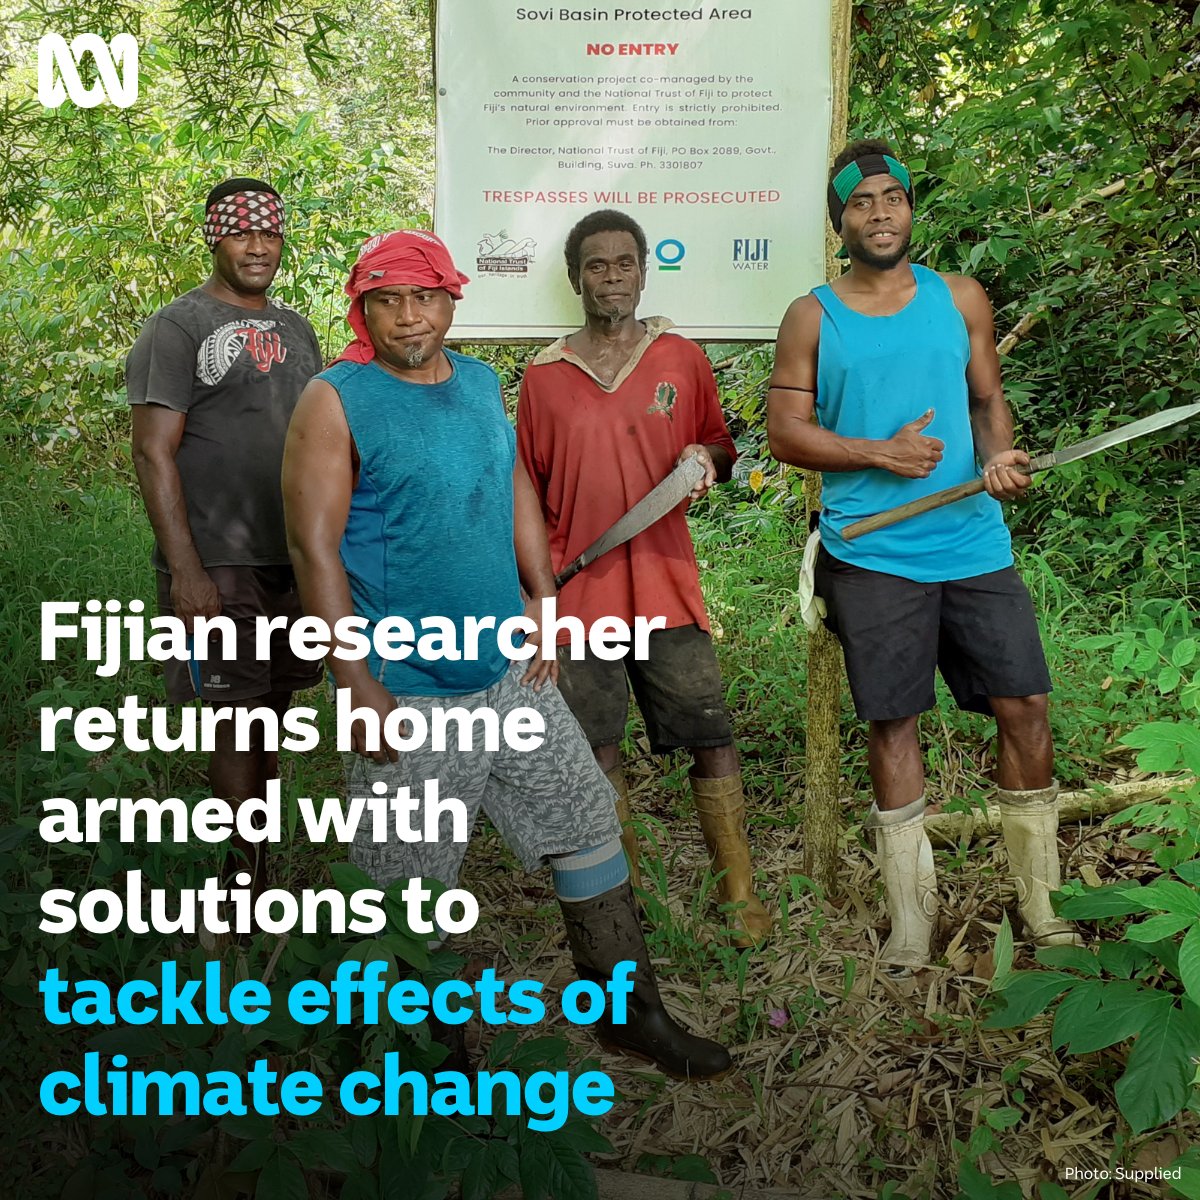 As a former resident of Galoa Island in Kadavdu, Albert Whippy knows the struggles the community faces around climate change — now he's returning as a researcher to help protect his childhood home. Listen here: ab.co/3Yg44il